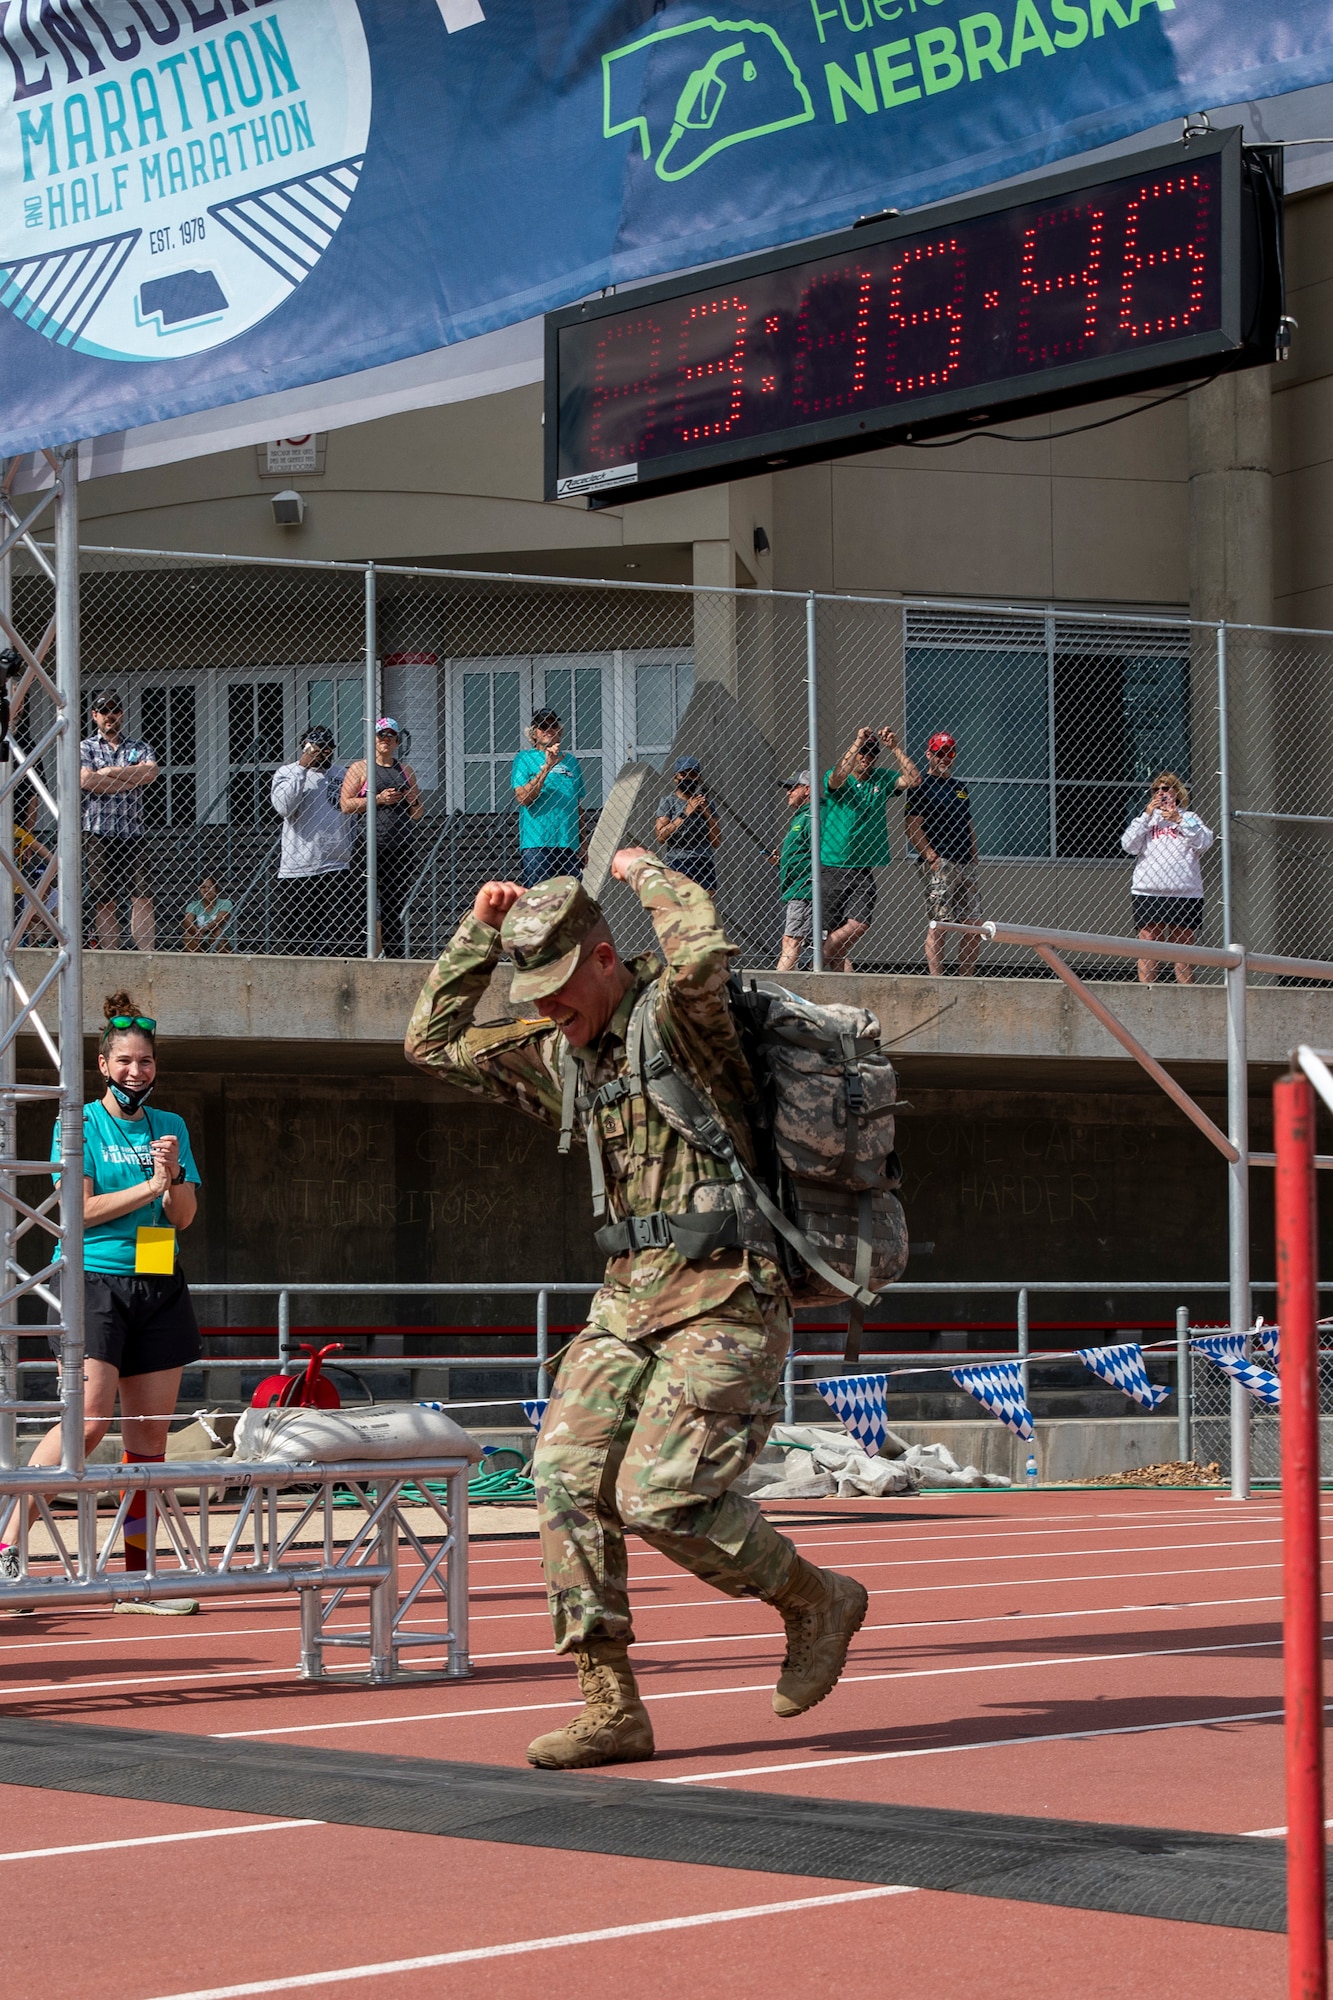 National Guard runners participate in the annual Lincoln Marathon time trials on Sunday, May 2, 2021.